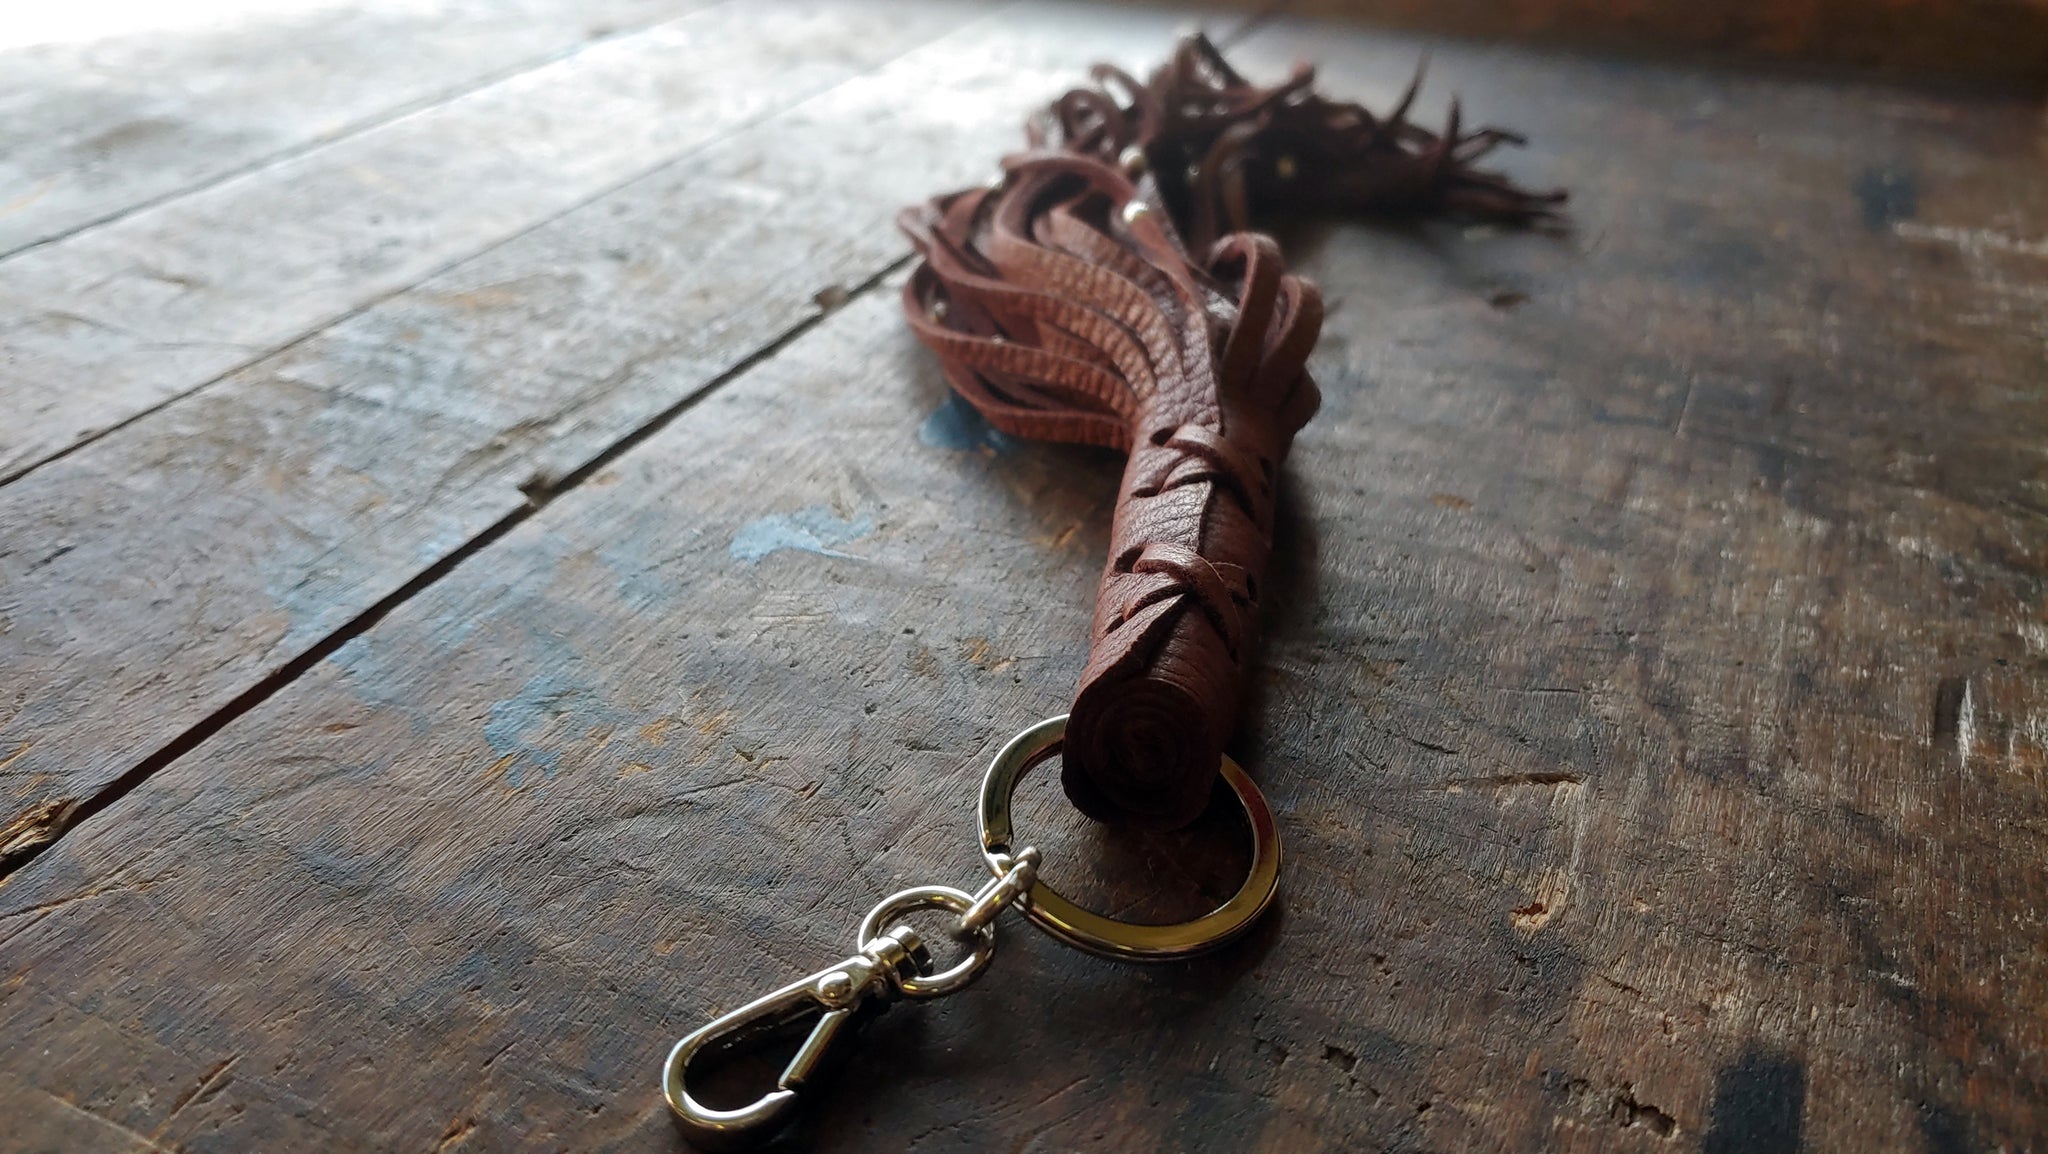 Nala Leather Tassel Key Chain in mahogany deerskin with silver beads and clip